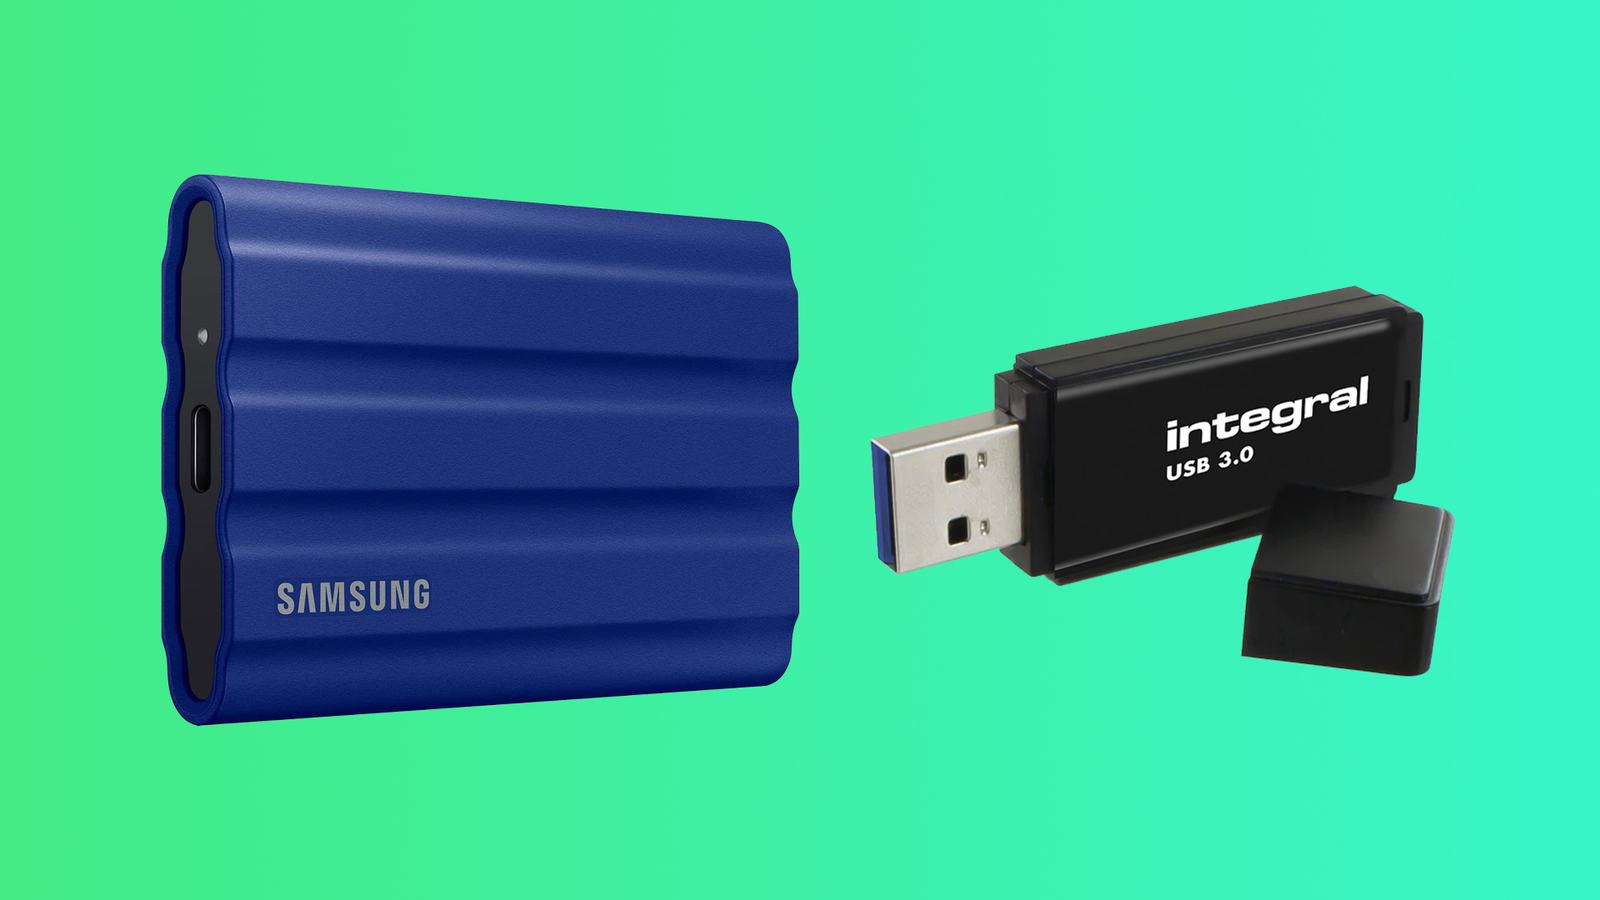 Two 1TB storage deals: do you need a USB drive or external SSD?